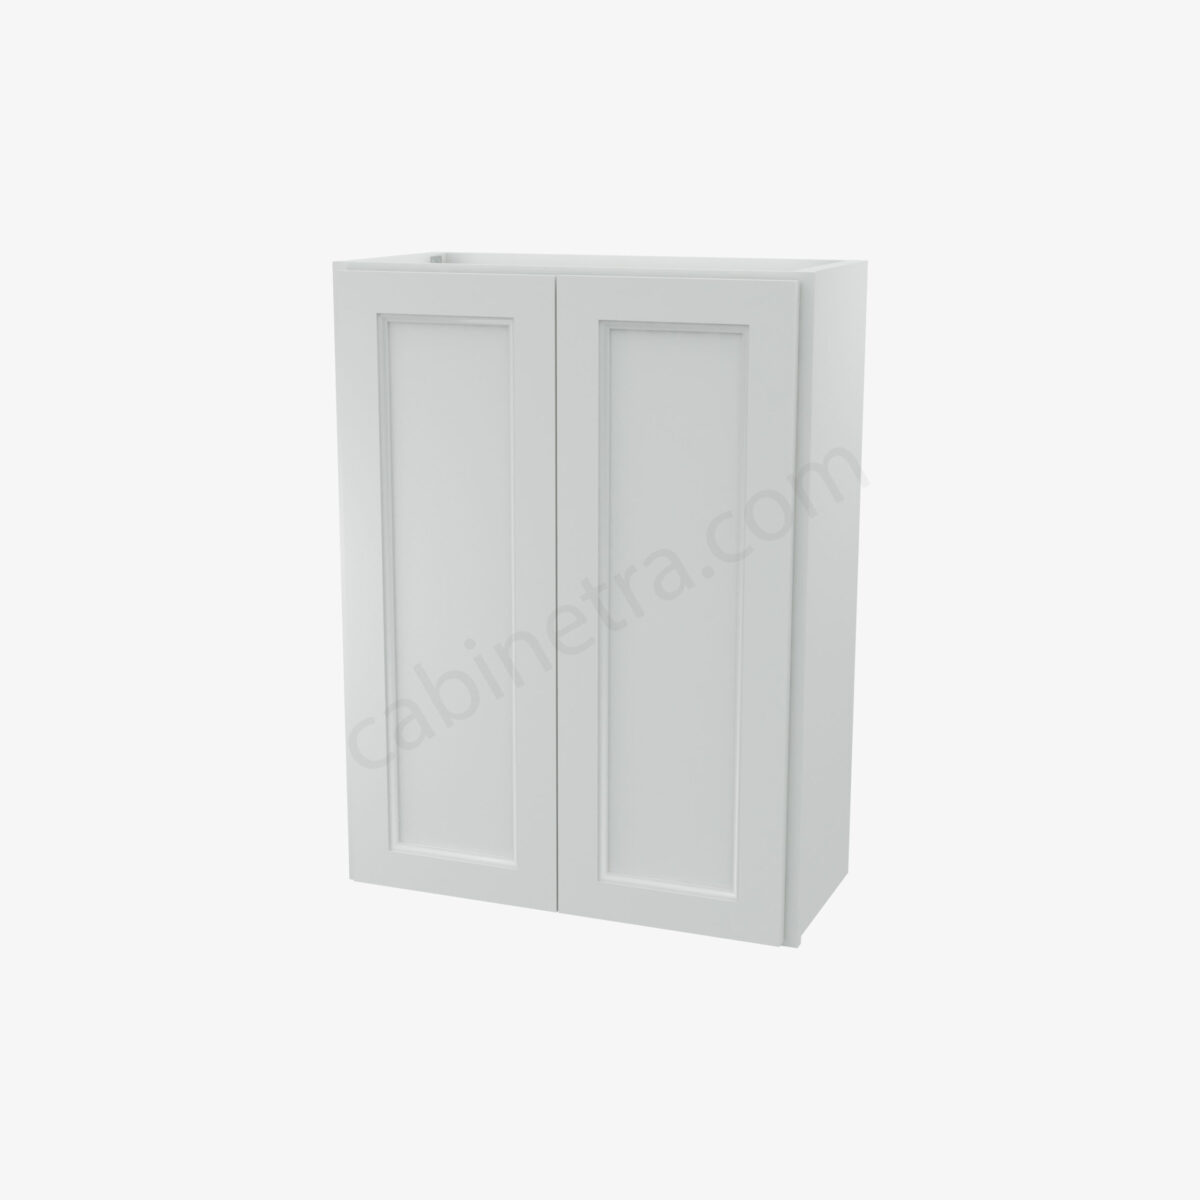 TW W2736B 0 Forevermark Uptown White Cabinetra scaled